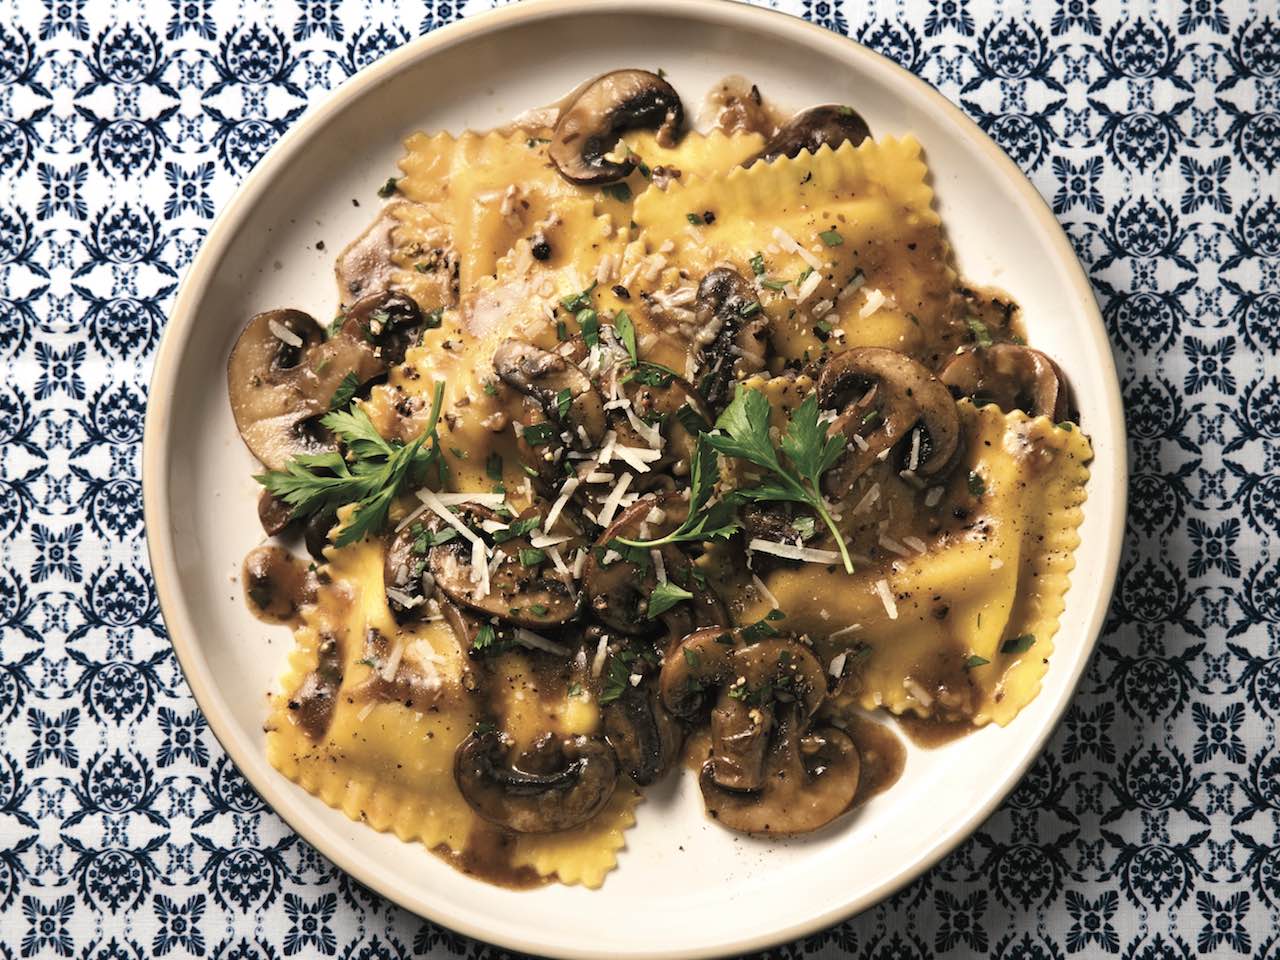 This cheesy ravioli pasta with earthy mushrooms and fresh parsley is ready ...